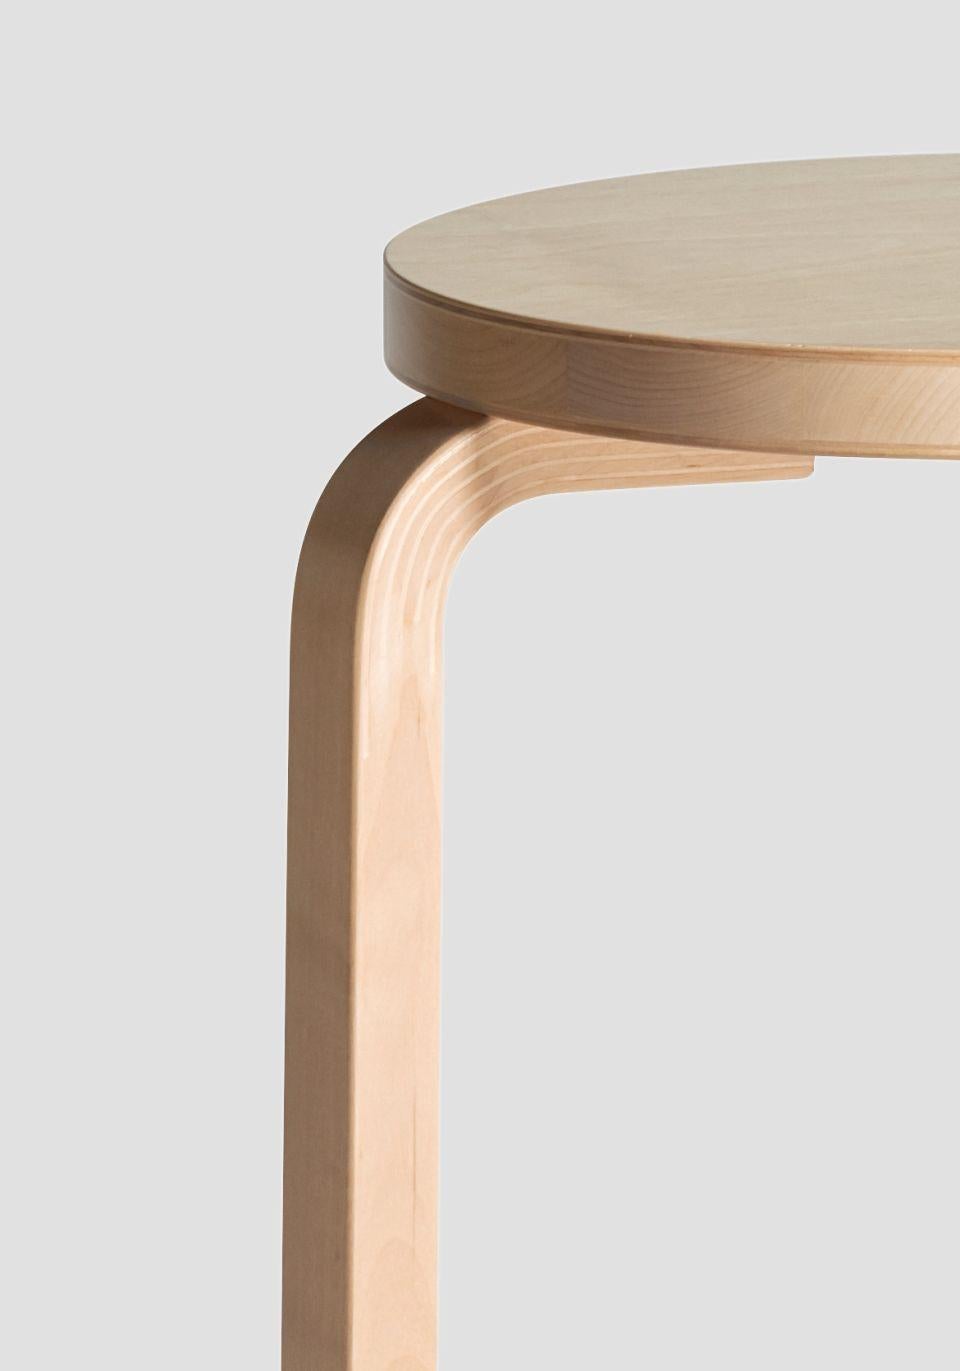 Scandinavian Modern Authentic Stool 60 in Lacquered Birch with Laminate Seat by Alvar Aalto & Artek